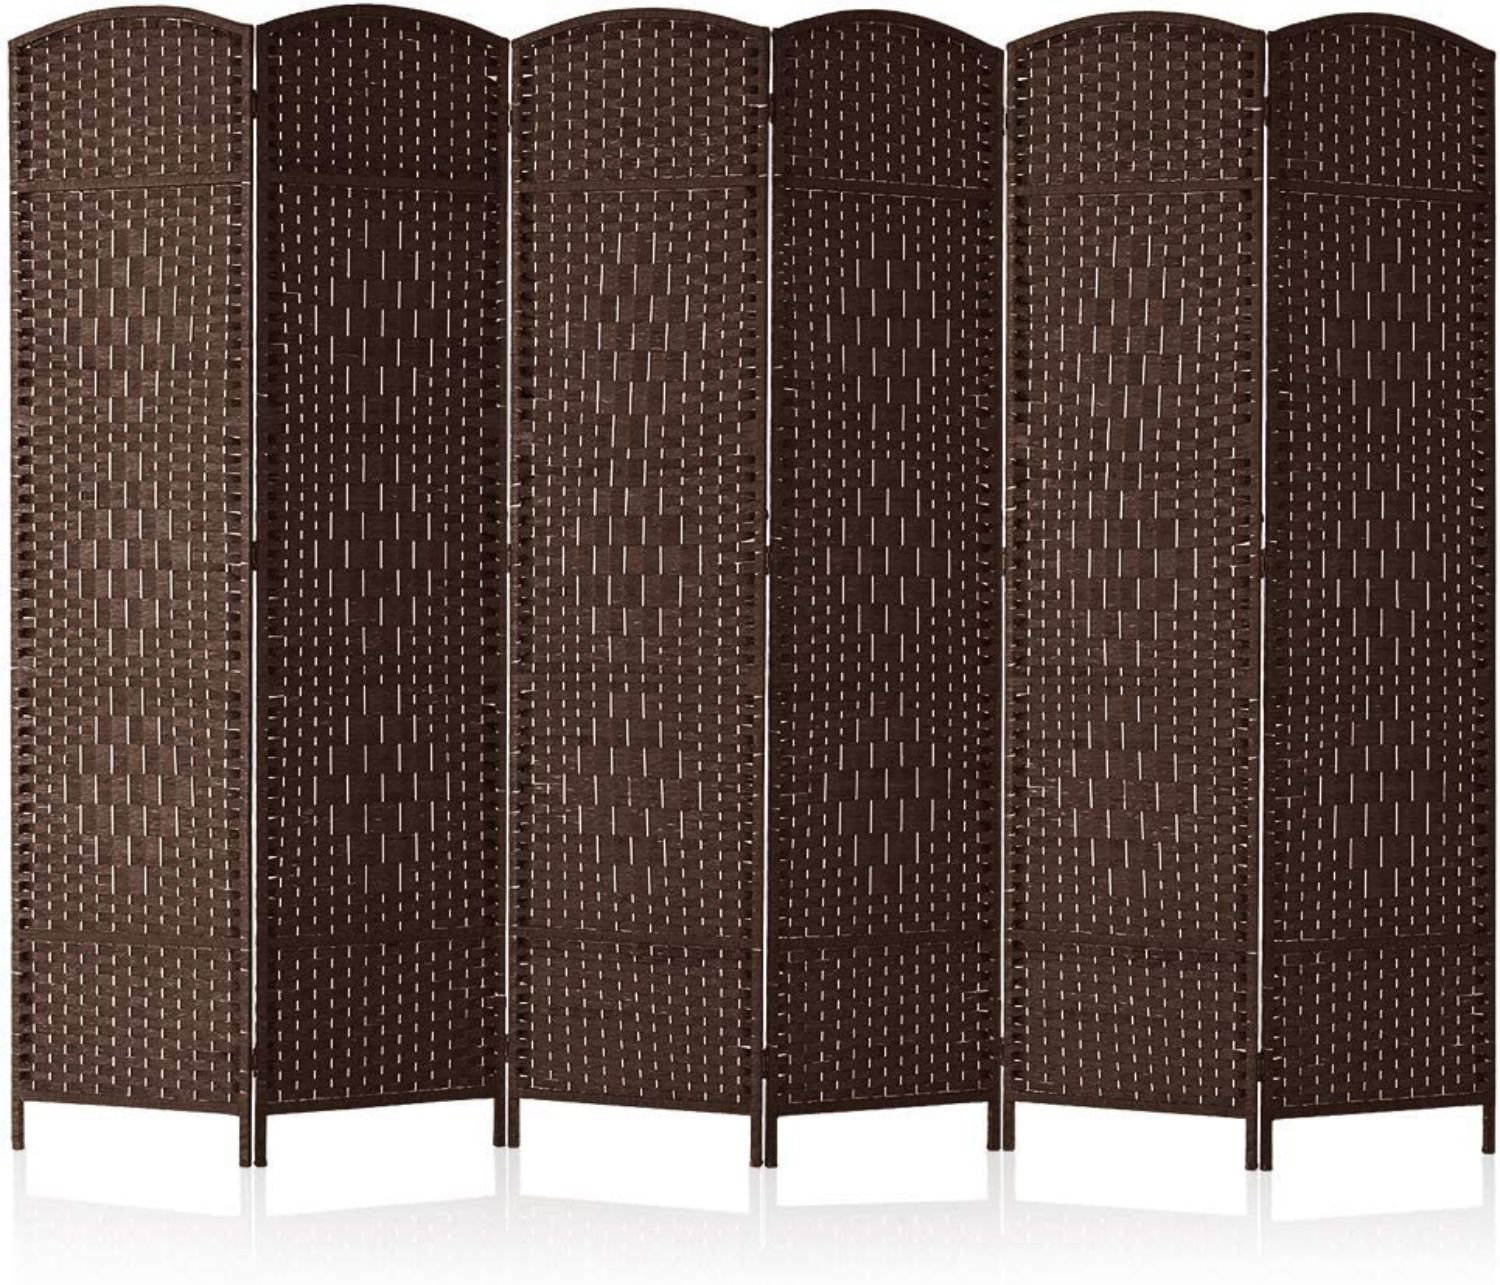 Room Dividers 6 Ft Tall 20 Wide Freestanding Privacy Screen With Diamond Woven Fibre Foldable Panel Partition Wall Divider Double Hinged Room Dividers 